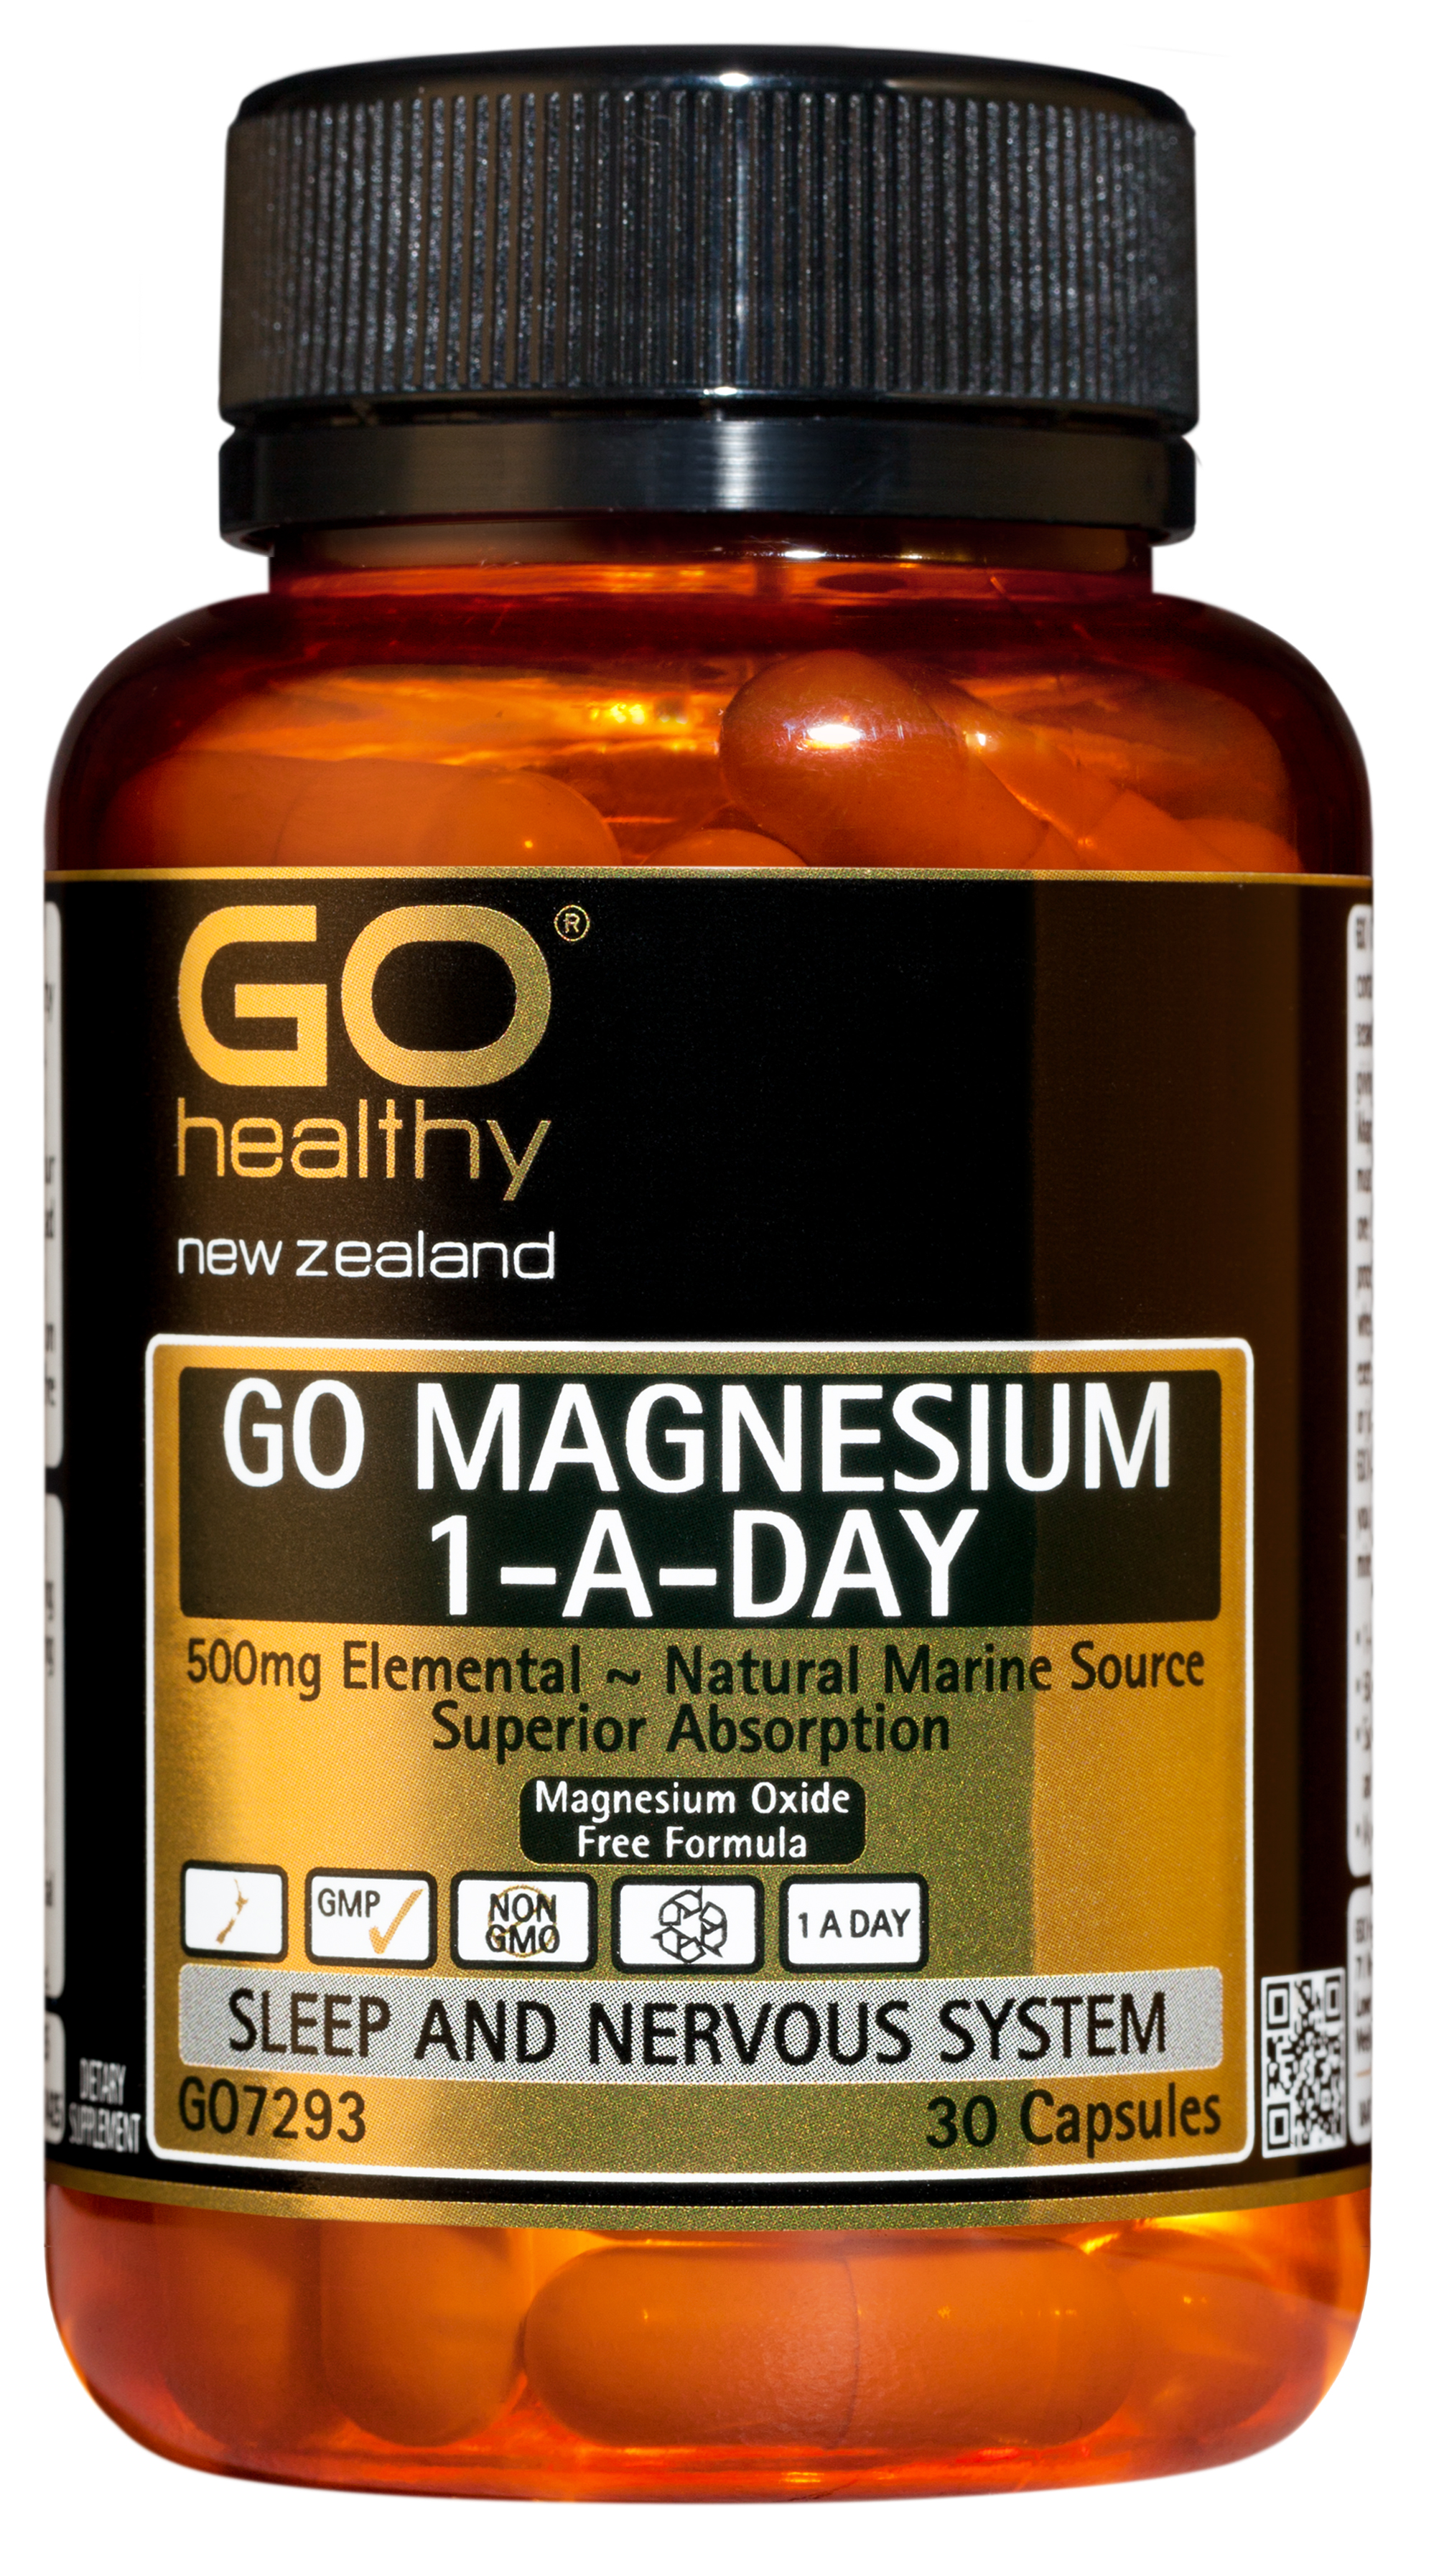 GO Healthy Magnesium 1-A-Day 30 Capsules